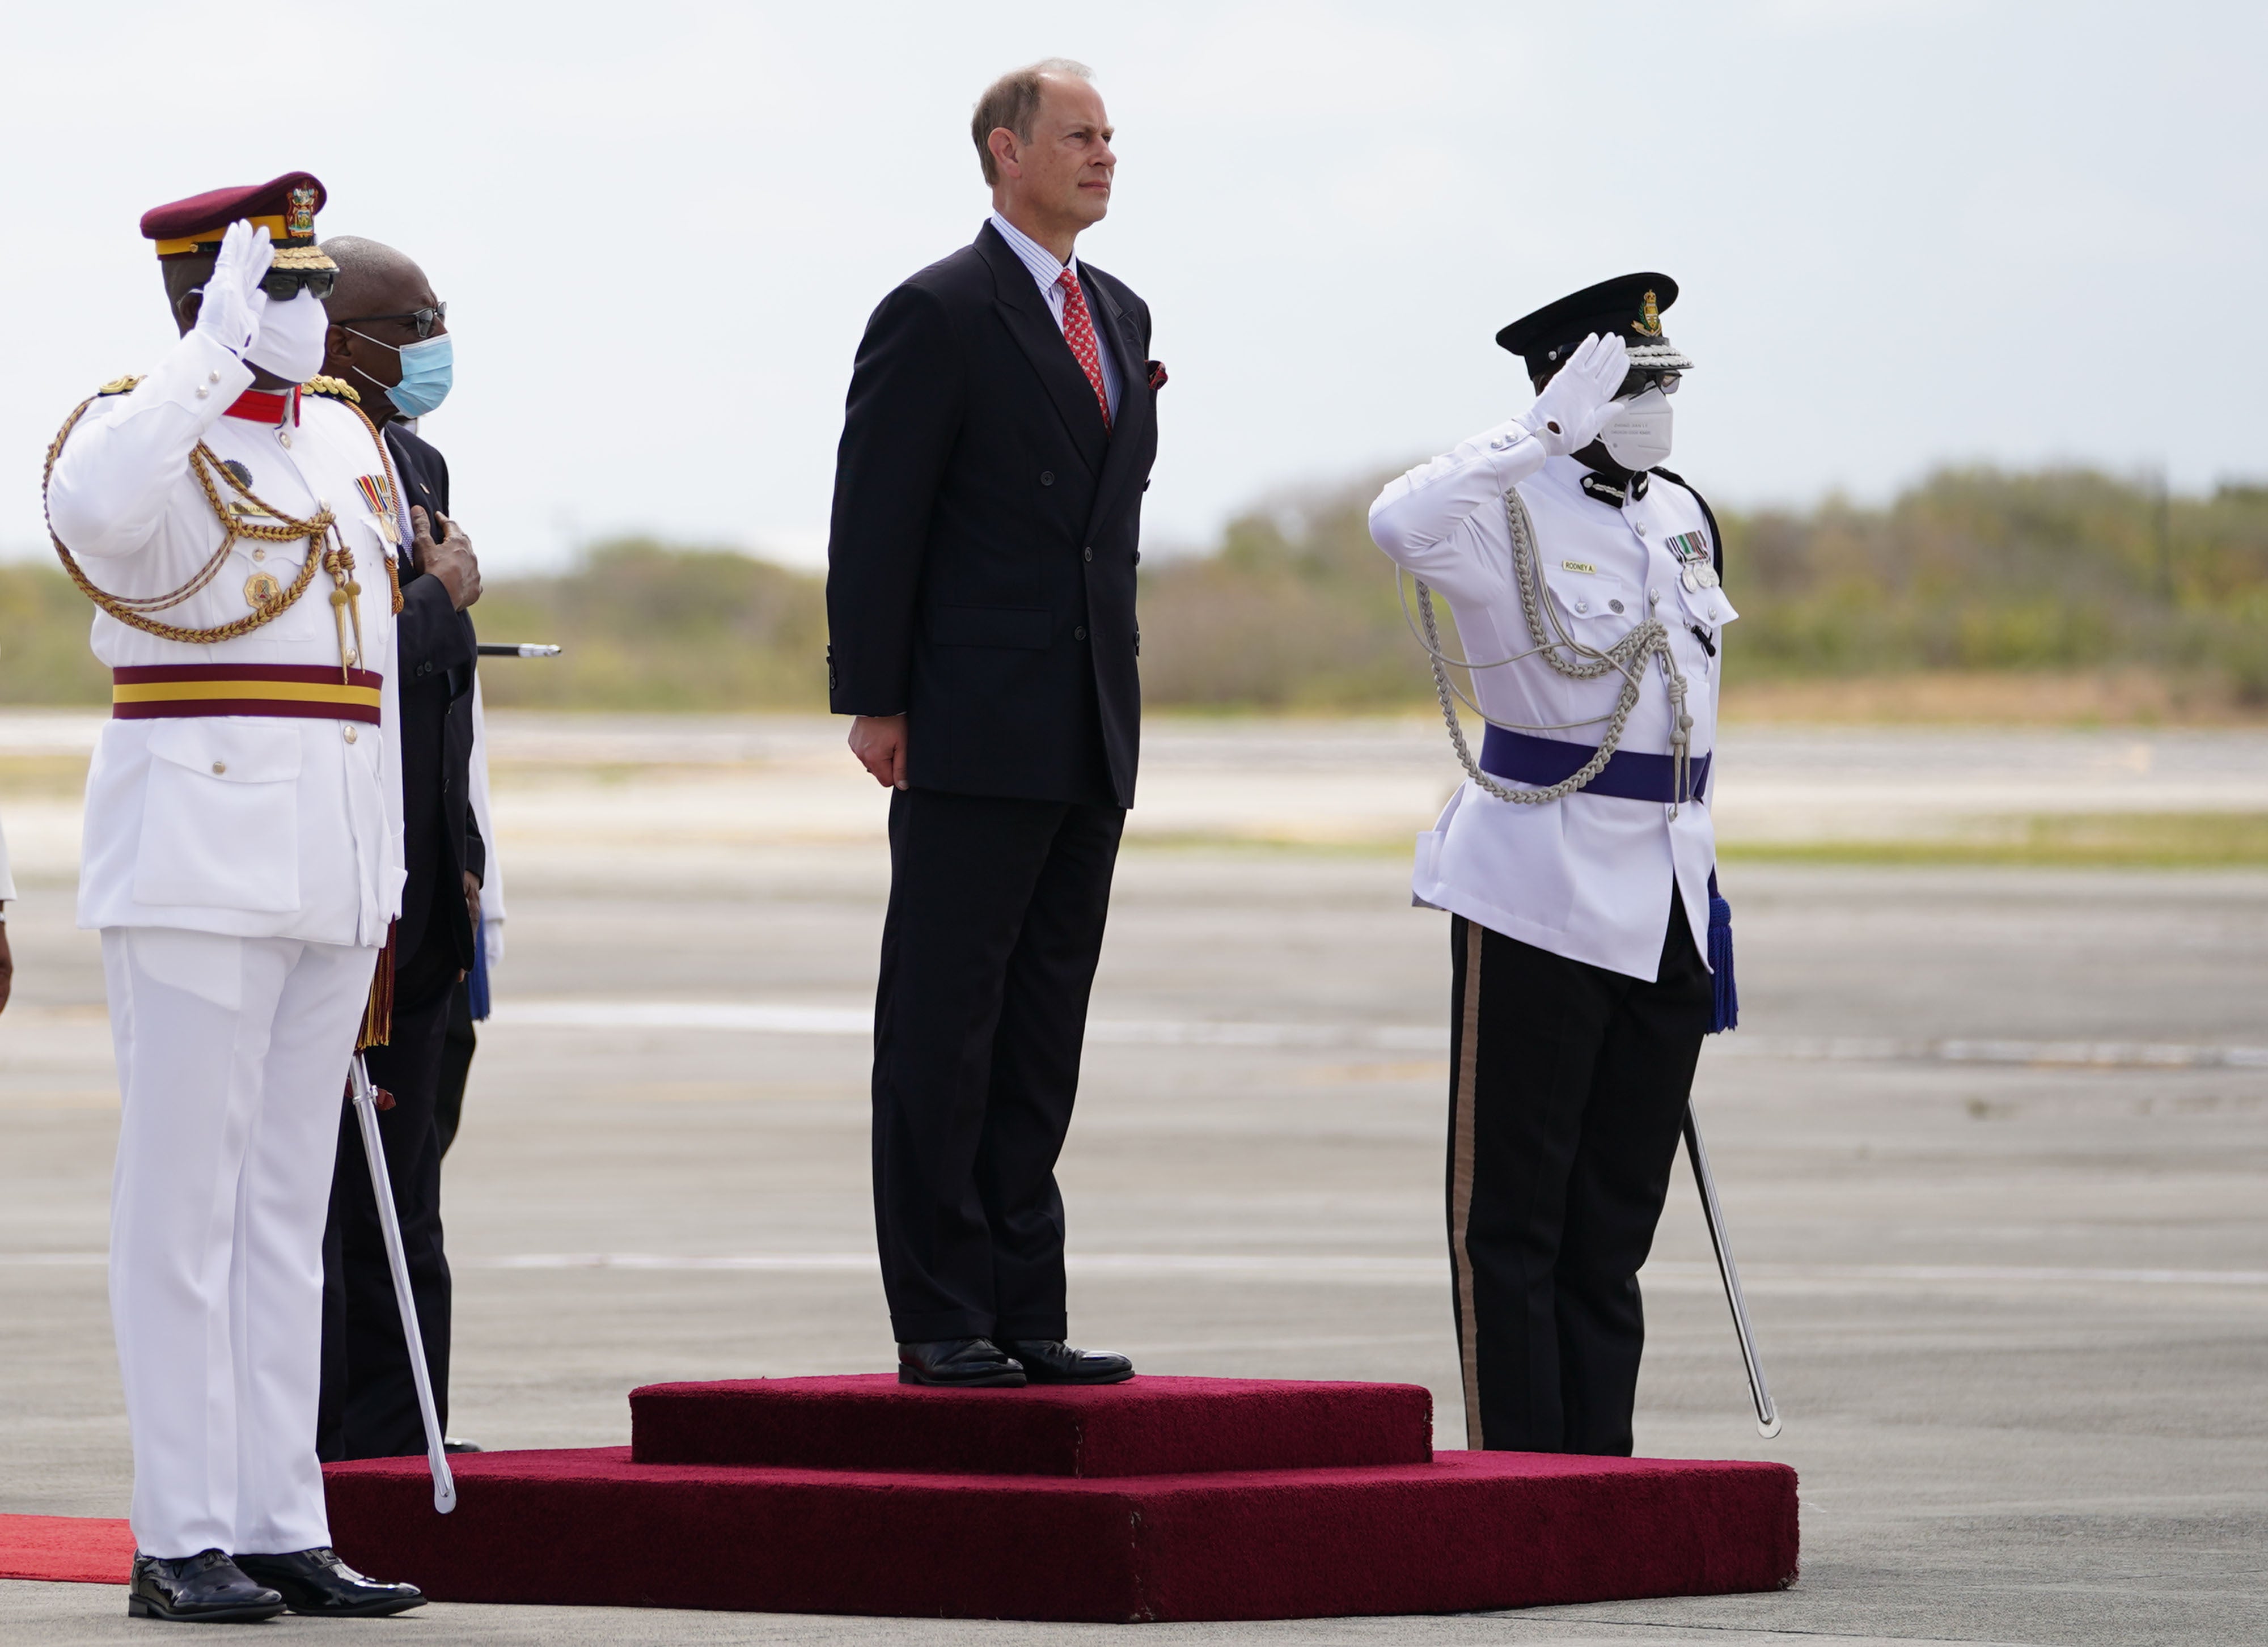 The Earl of Wessex looks at a guard of honour after arriving at VC Bird International Airport (Joe Giddens/PA)